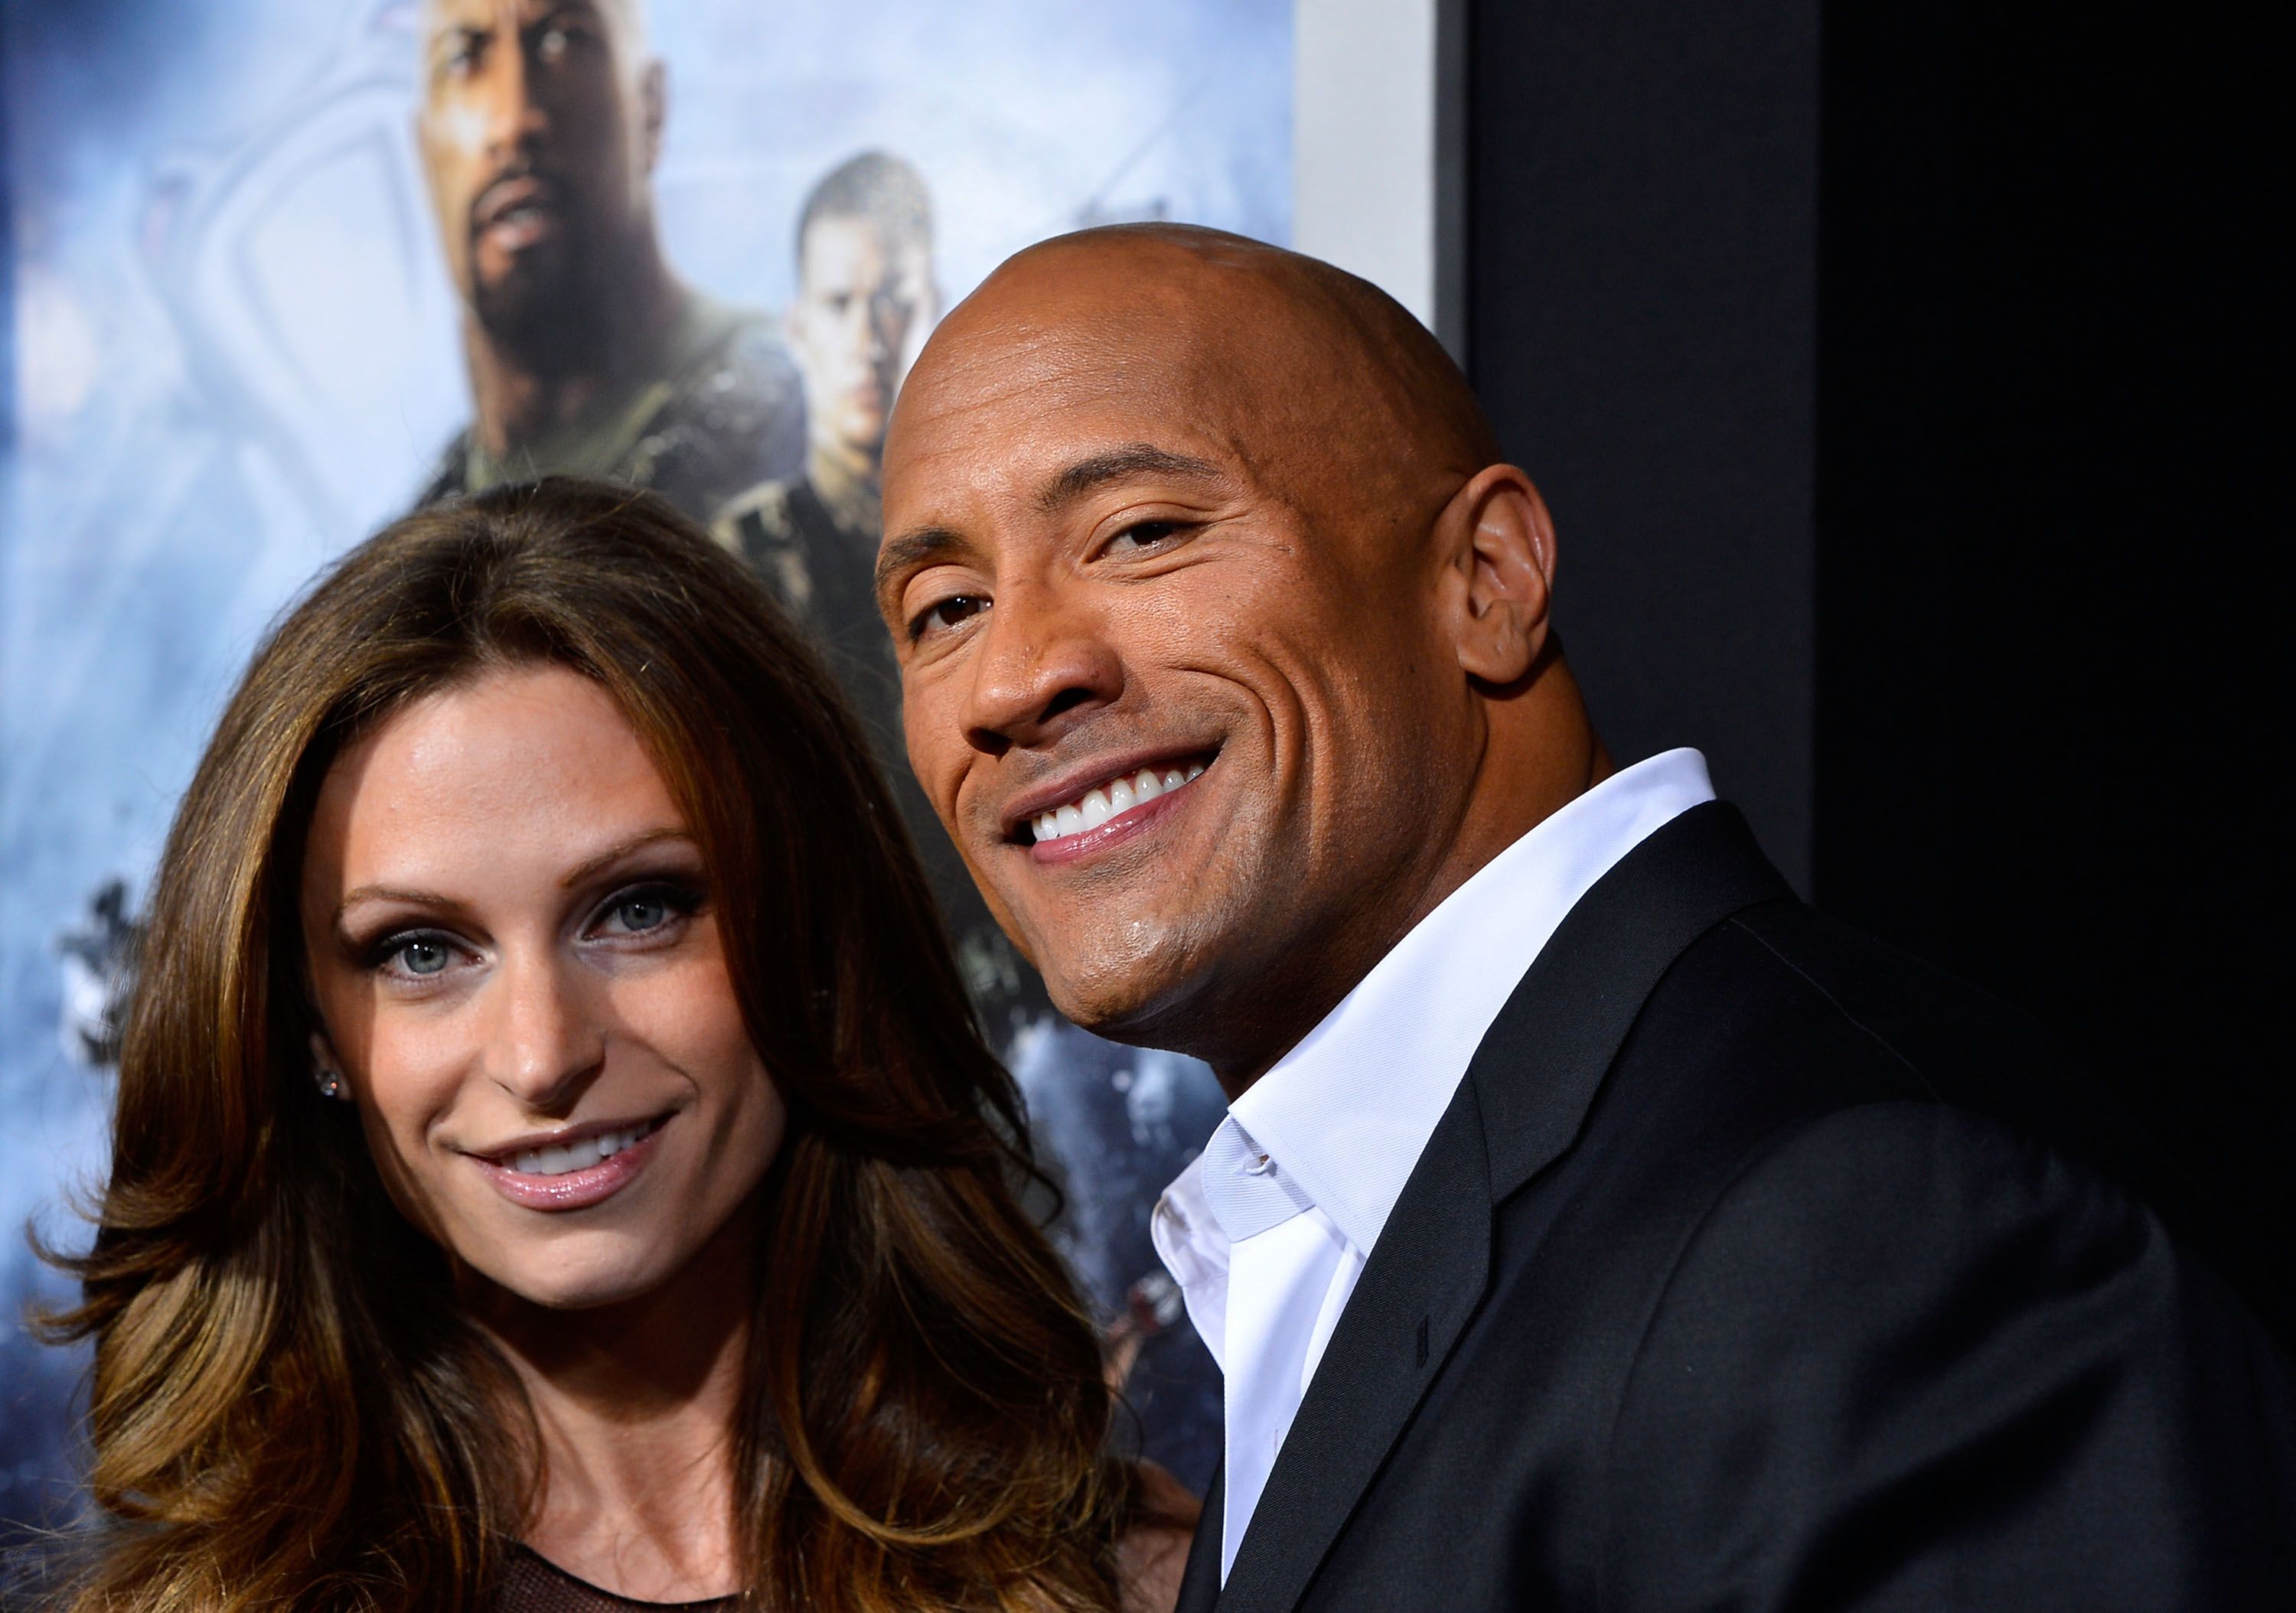 Lauren Hashian and  Dwayne "The Rock" Johnson at the premiere of "G.I. Joe: Retaliation" on March 28, 2013, in Hollywood, California | Photo: Frazer Harrison/Getty Images